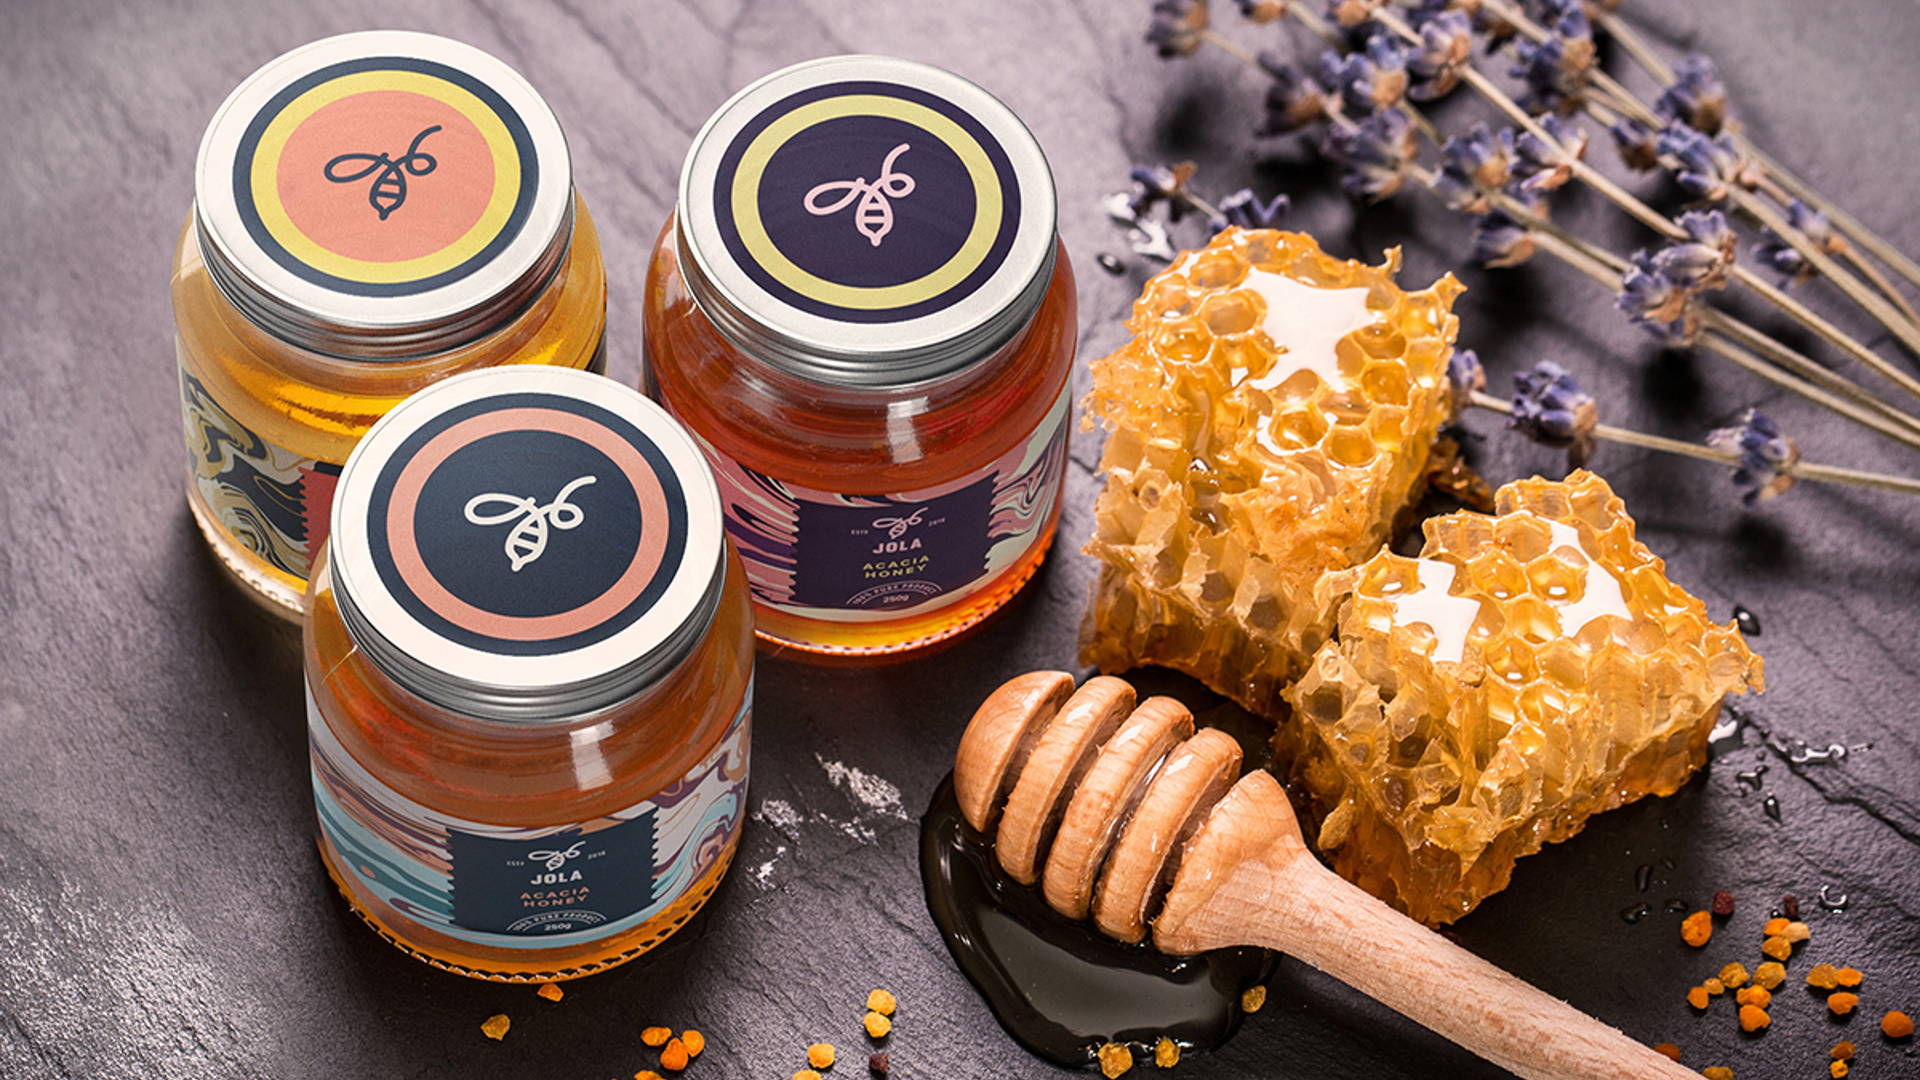 Featured image for How Designers of JOLA Honey Avoided Cliches to Create this Lovely Packaging